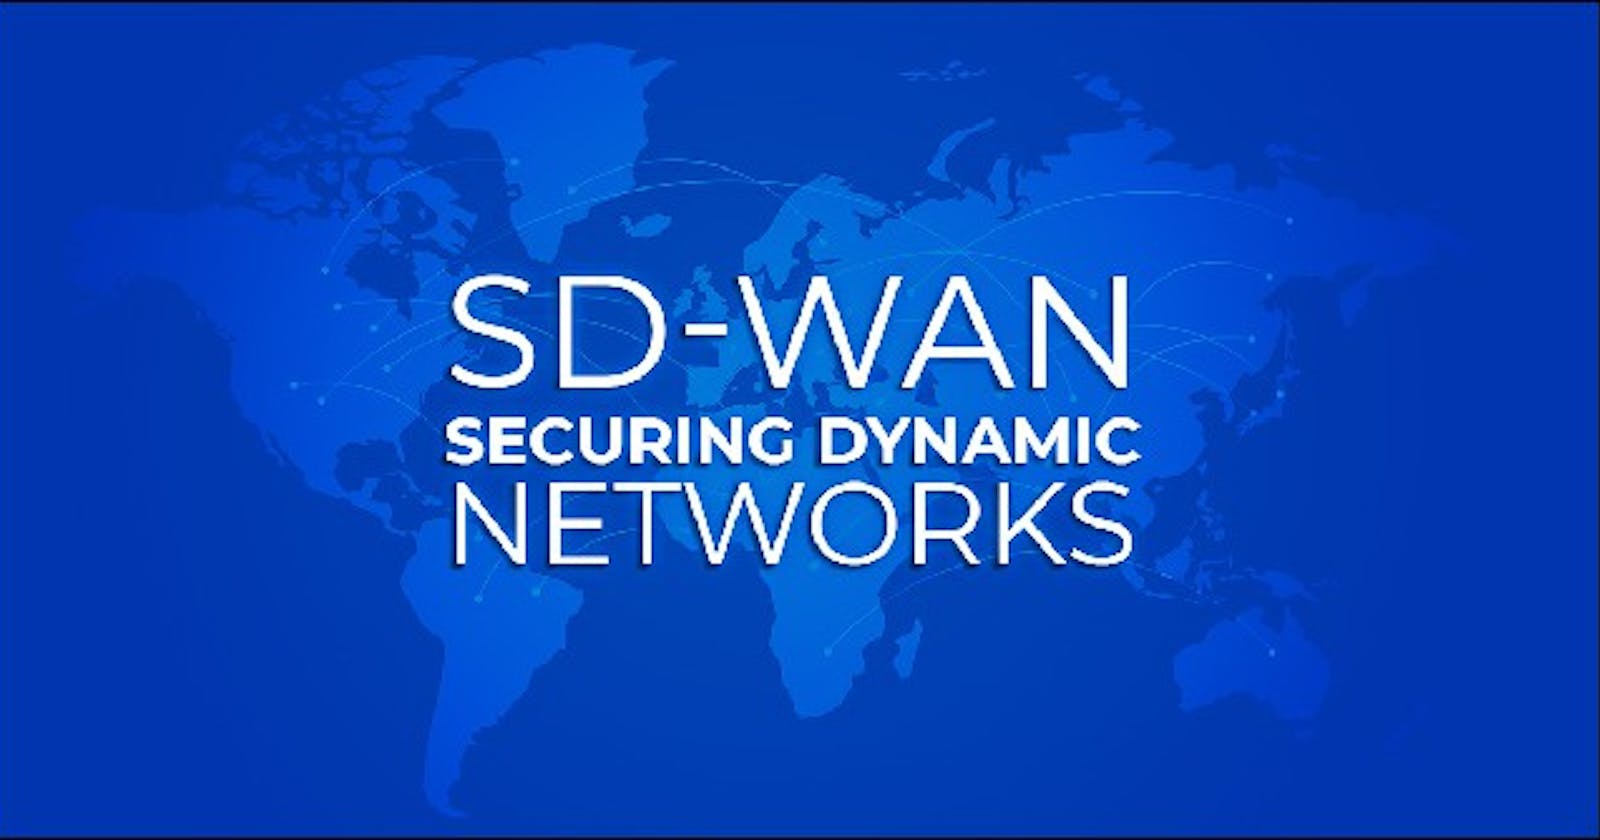 The Evolution of Networking and the Advantages of SD-WAN